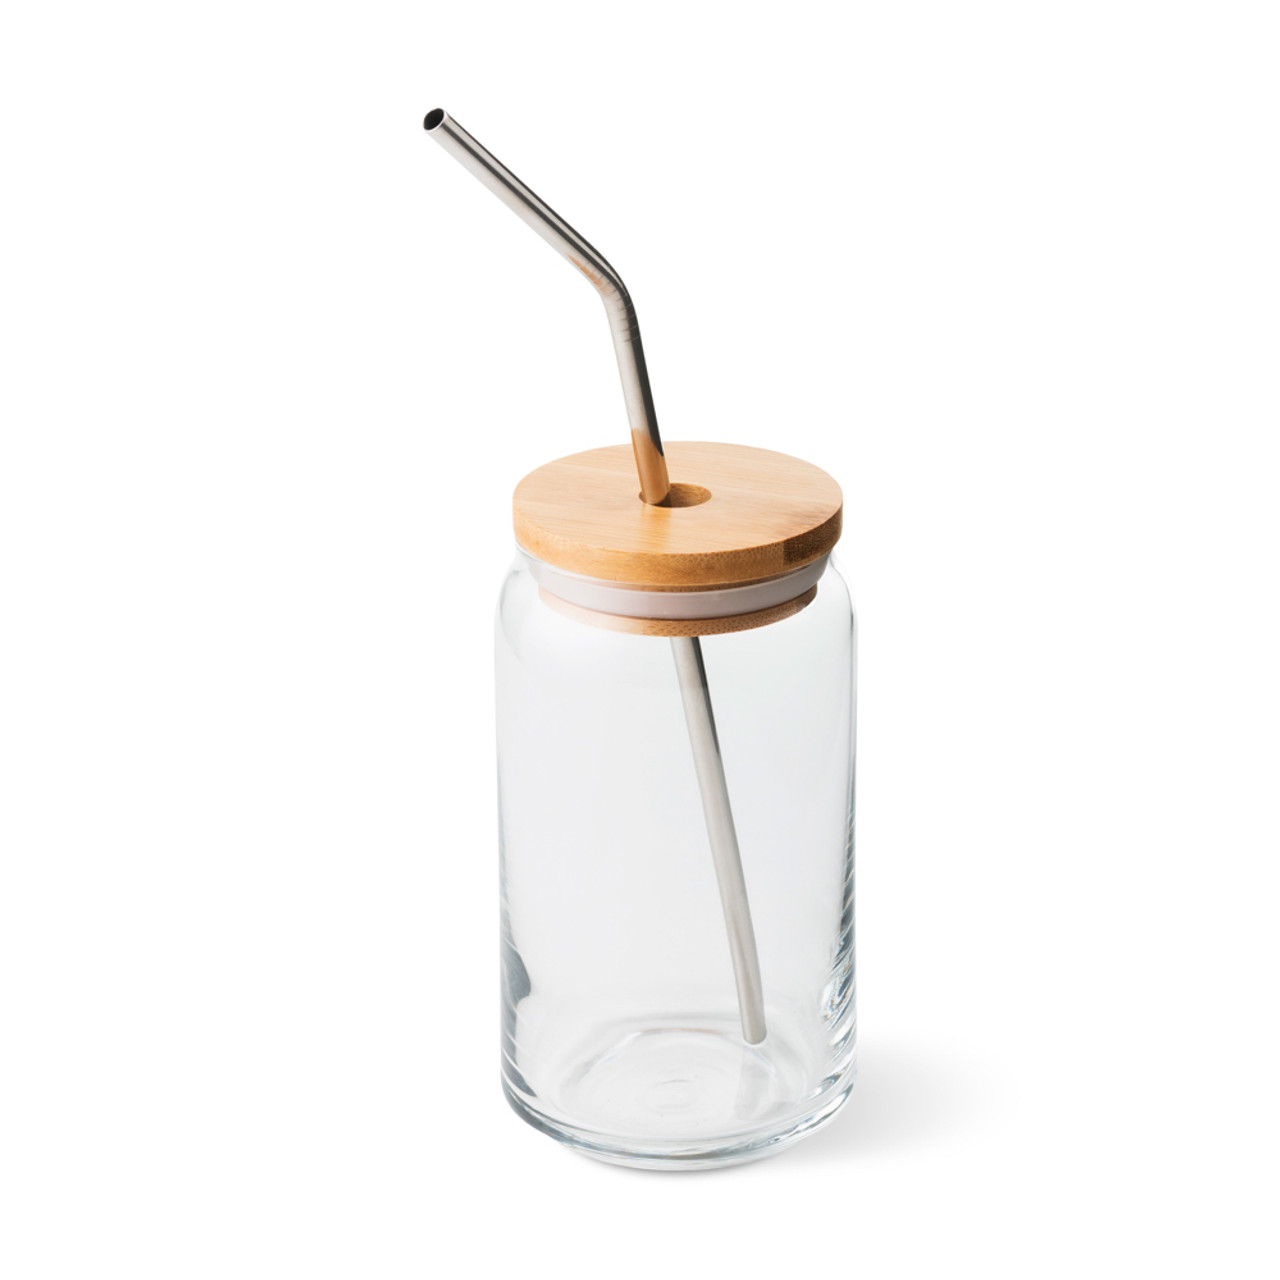 https://cdn11.bigcommerce.com/s-cznxq08r7/images/stencil/1280x1280/products/5577/14919/CAN-LID-STRAW-KIT_Can_Shaped_Glass_with_Reusable_Bamboo_Lid_Stainless_Steel_Drinking_Straw_-_16_oz_02__47851.1672251152.jpg?c=1